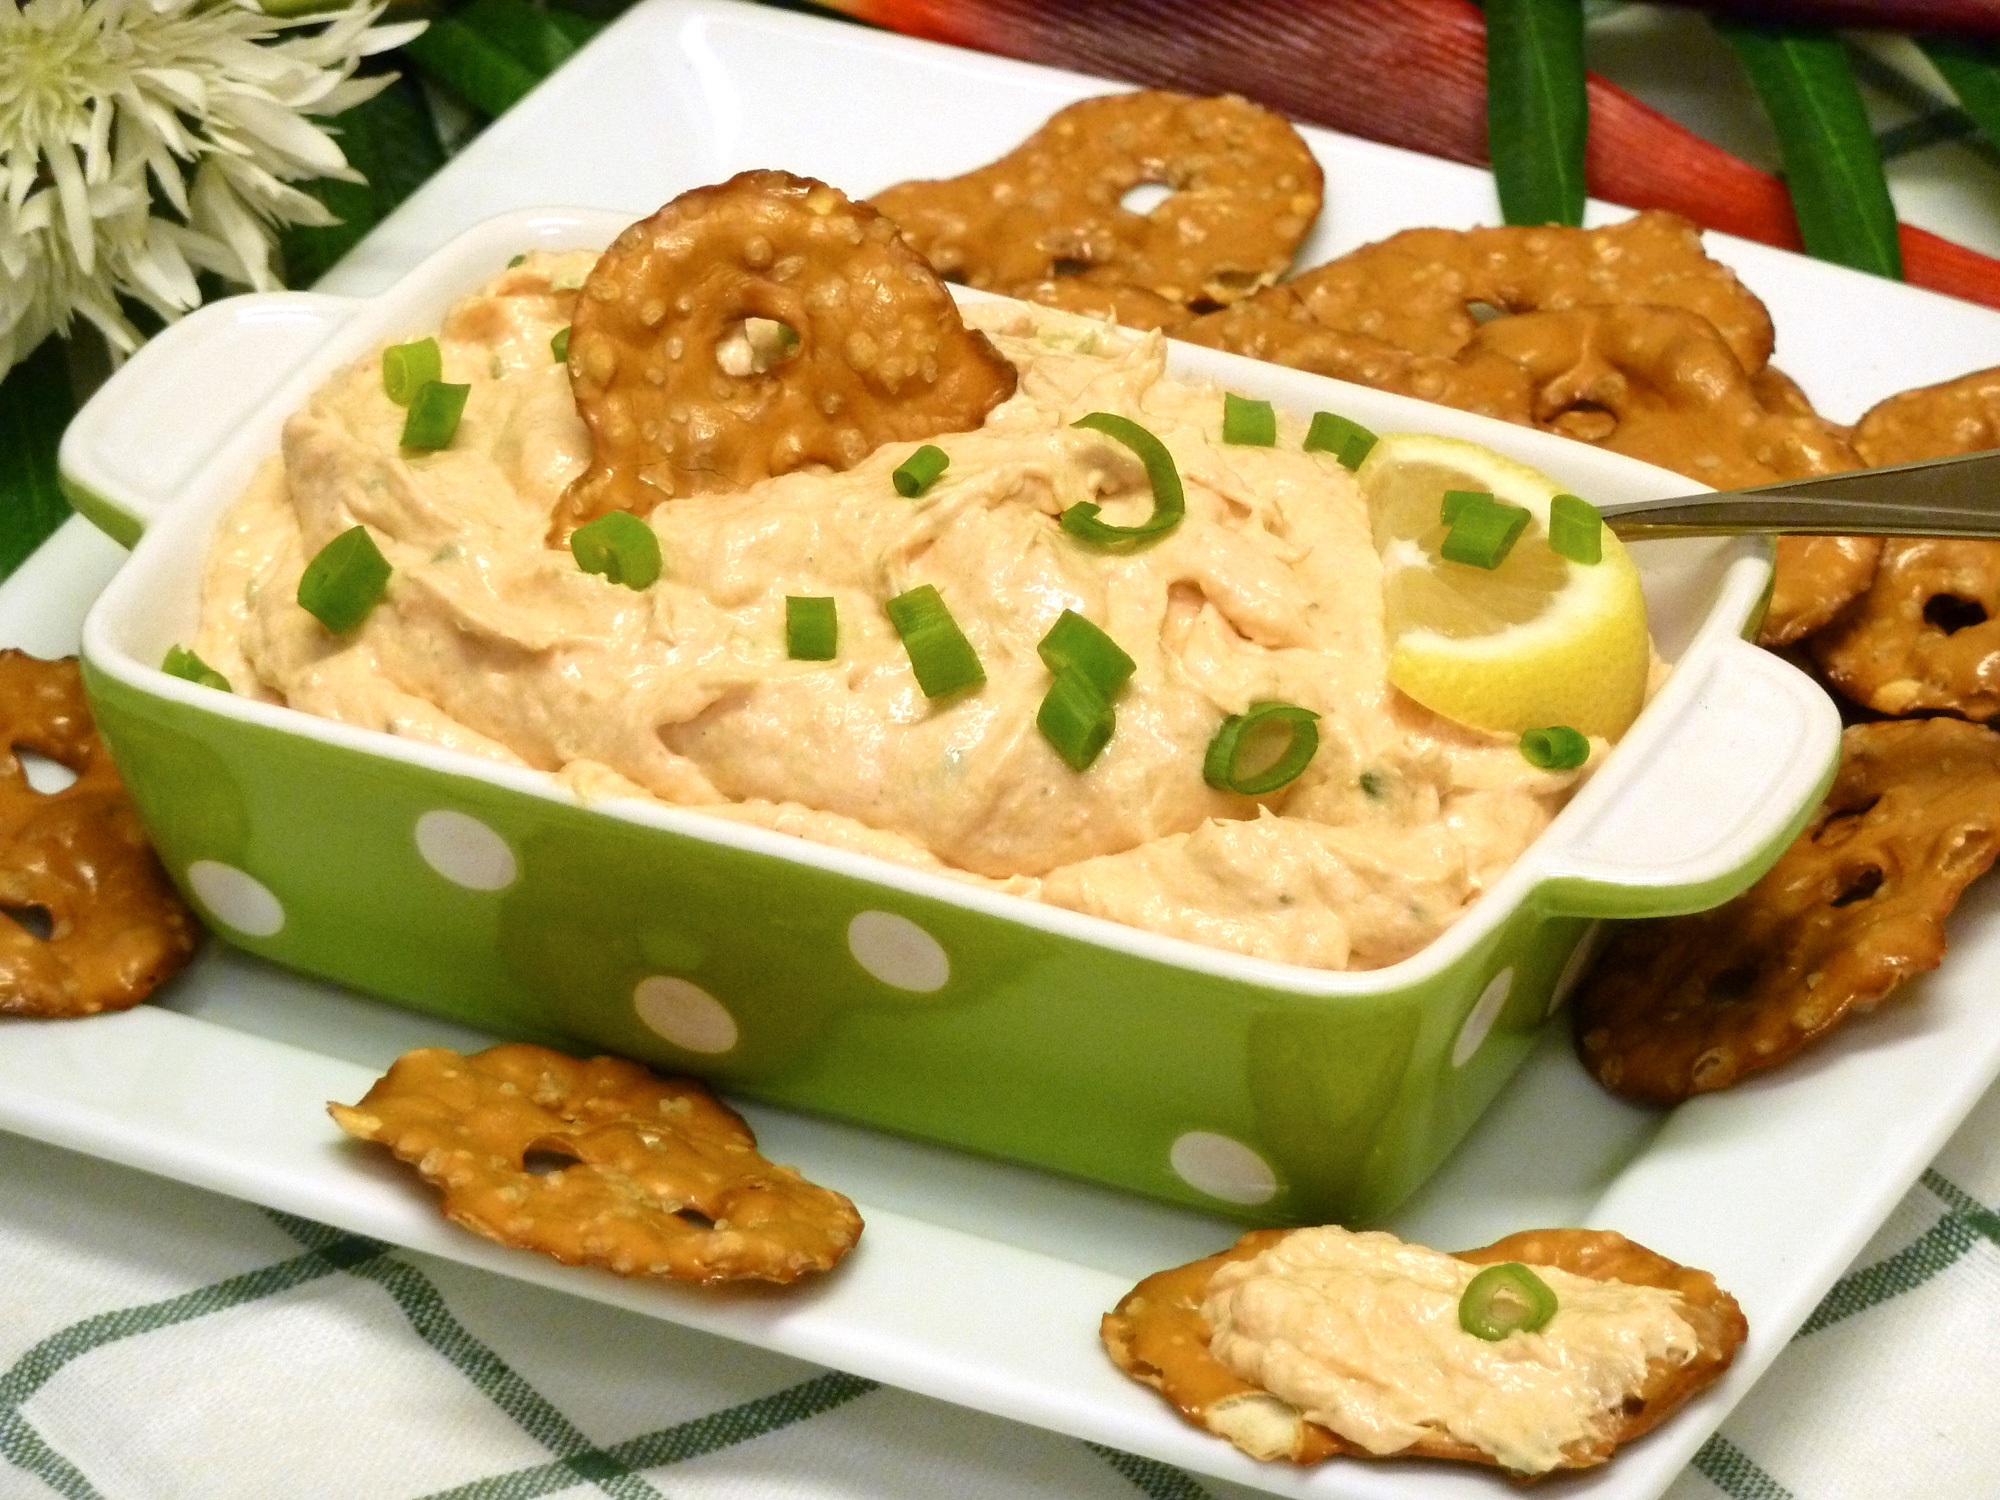 Less expensive smoked salmon dip is a hit at parties.